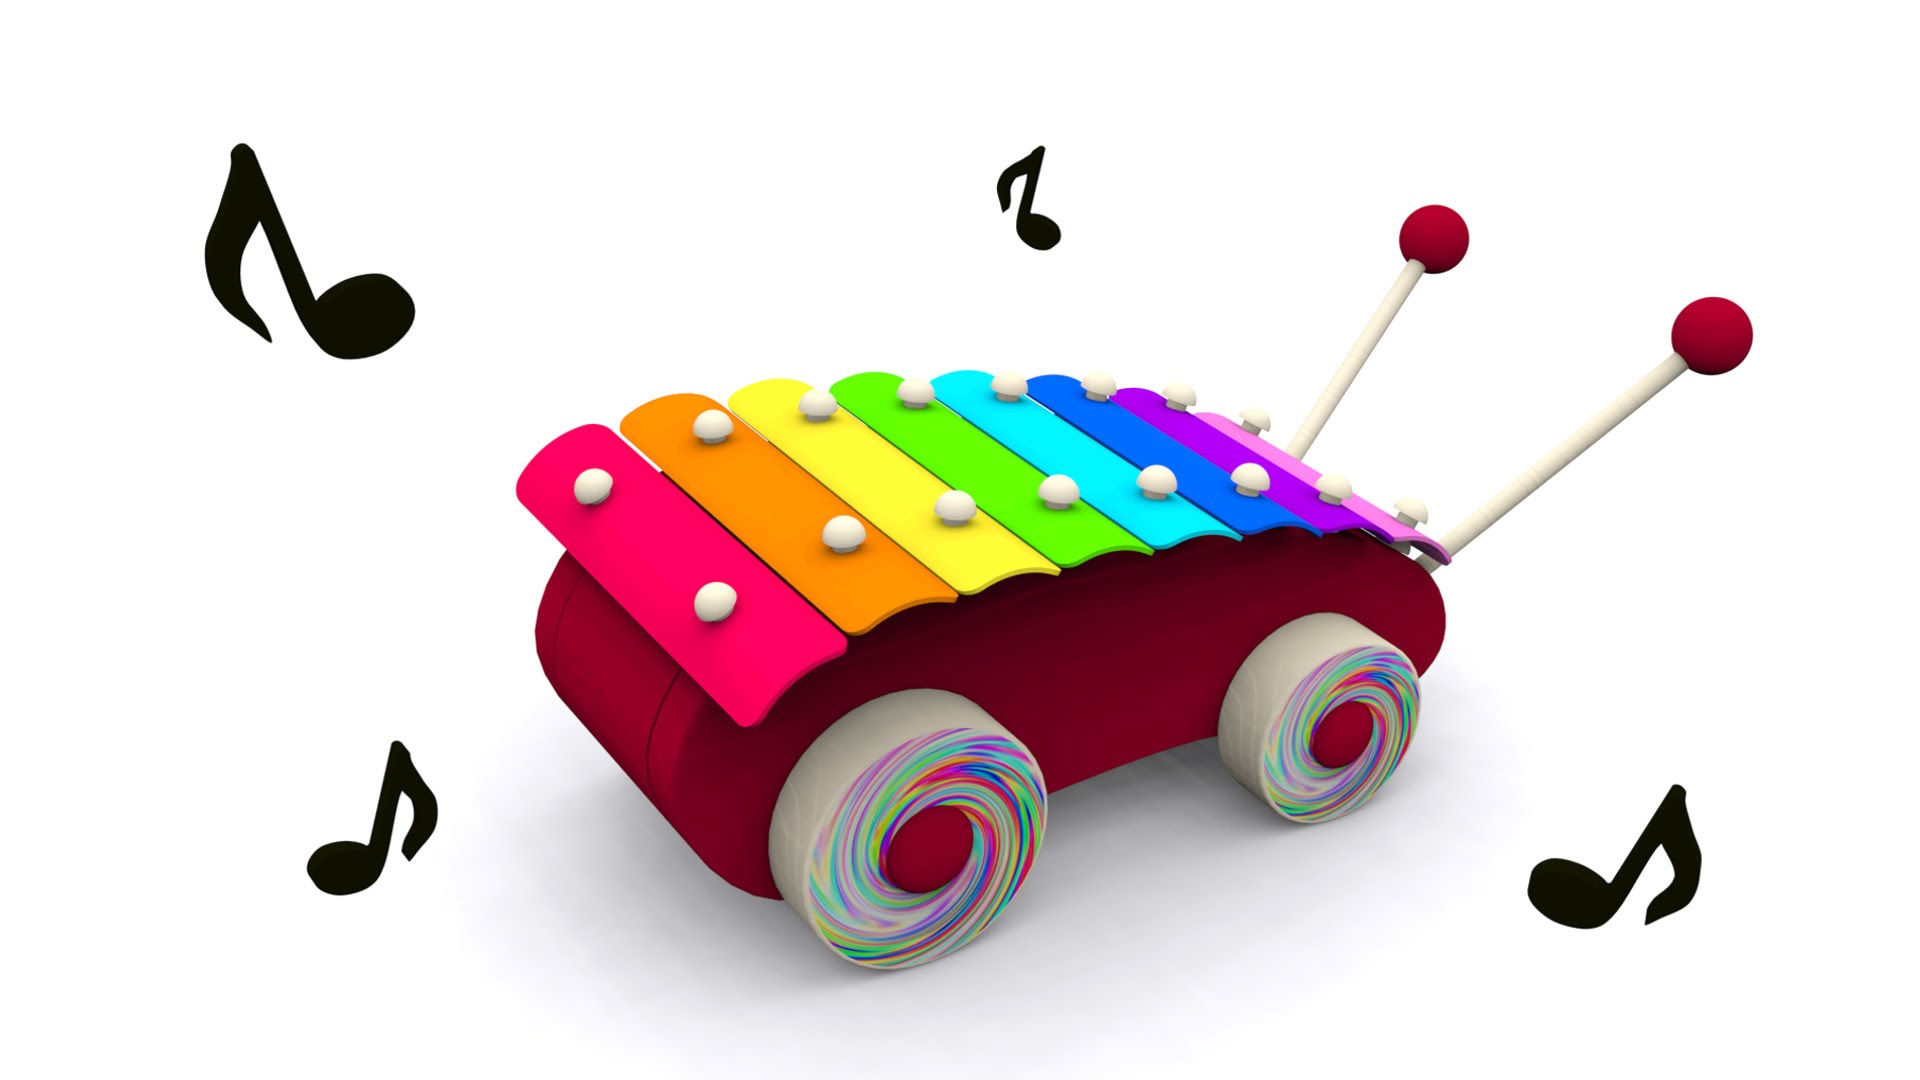 Cartoons for babies. Baby toys: xylophone. Learn and sing musical ...